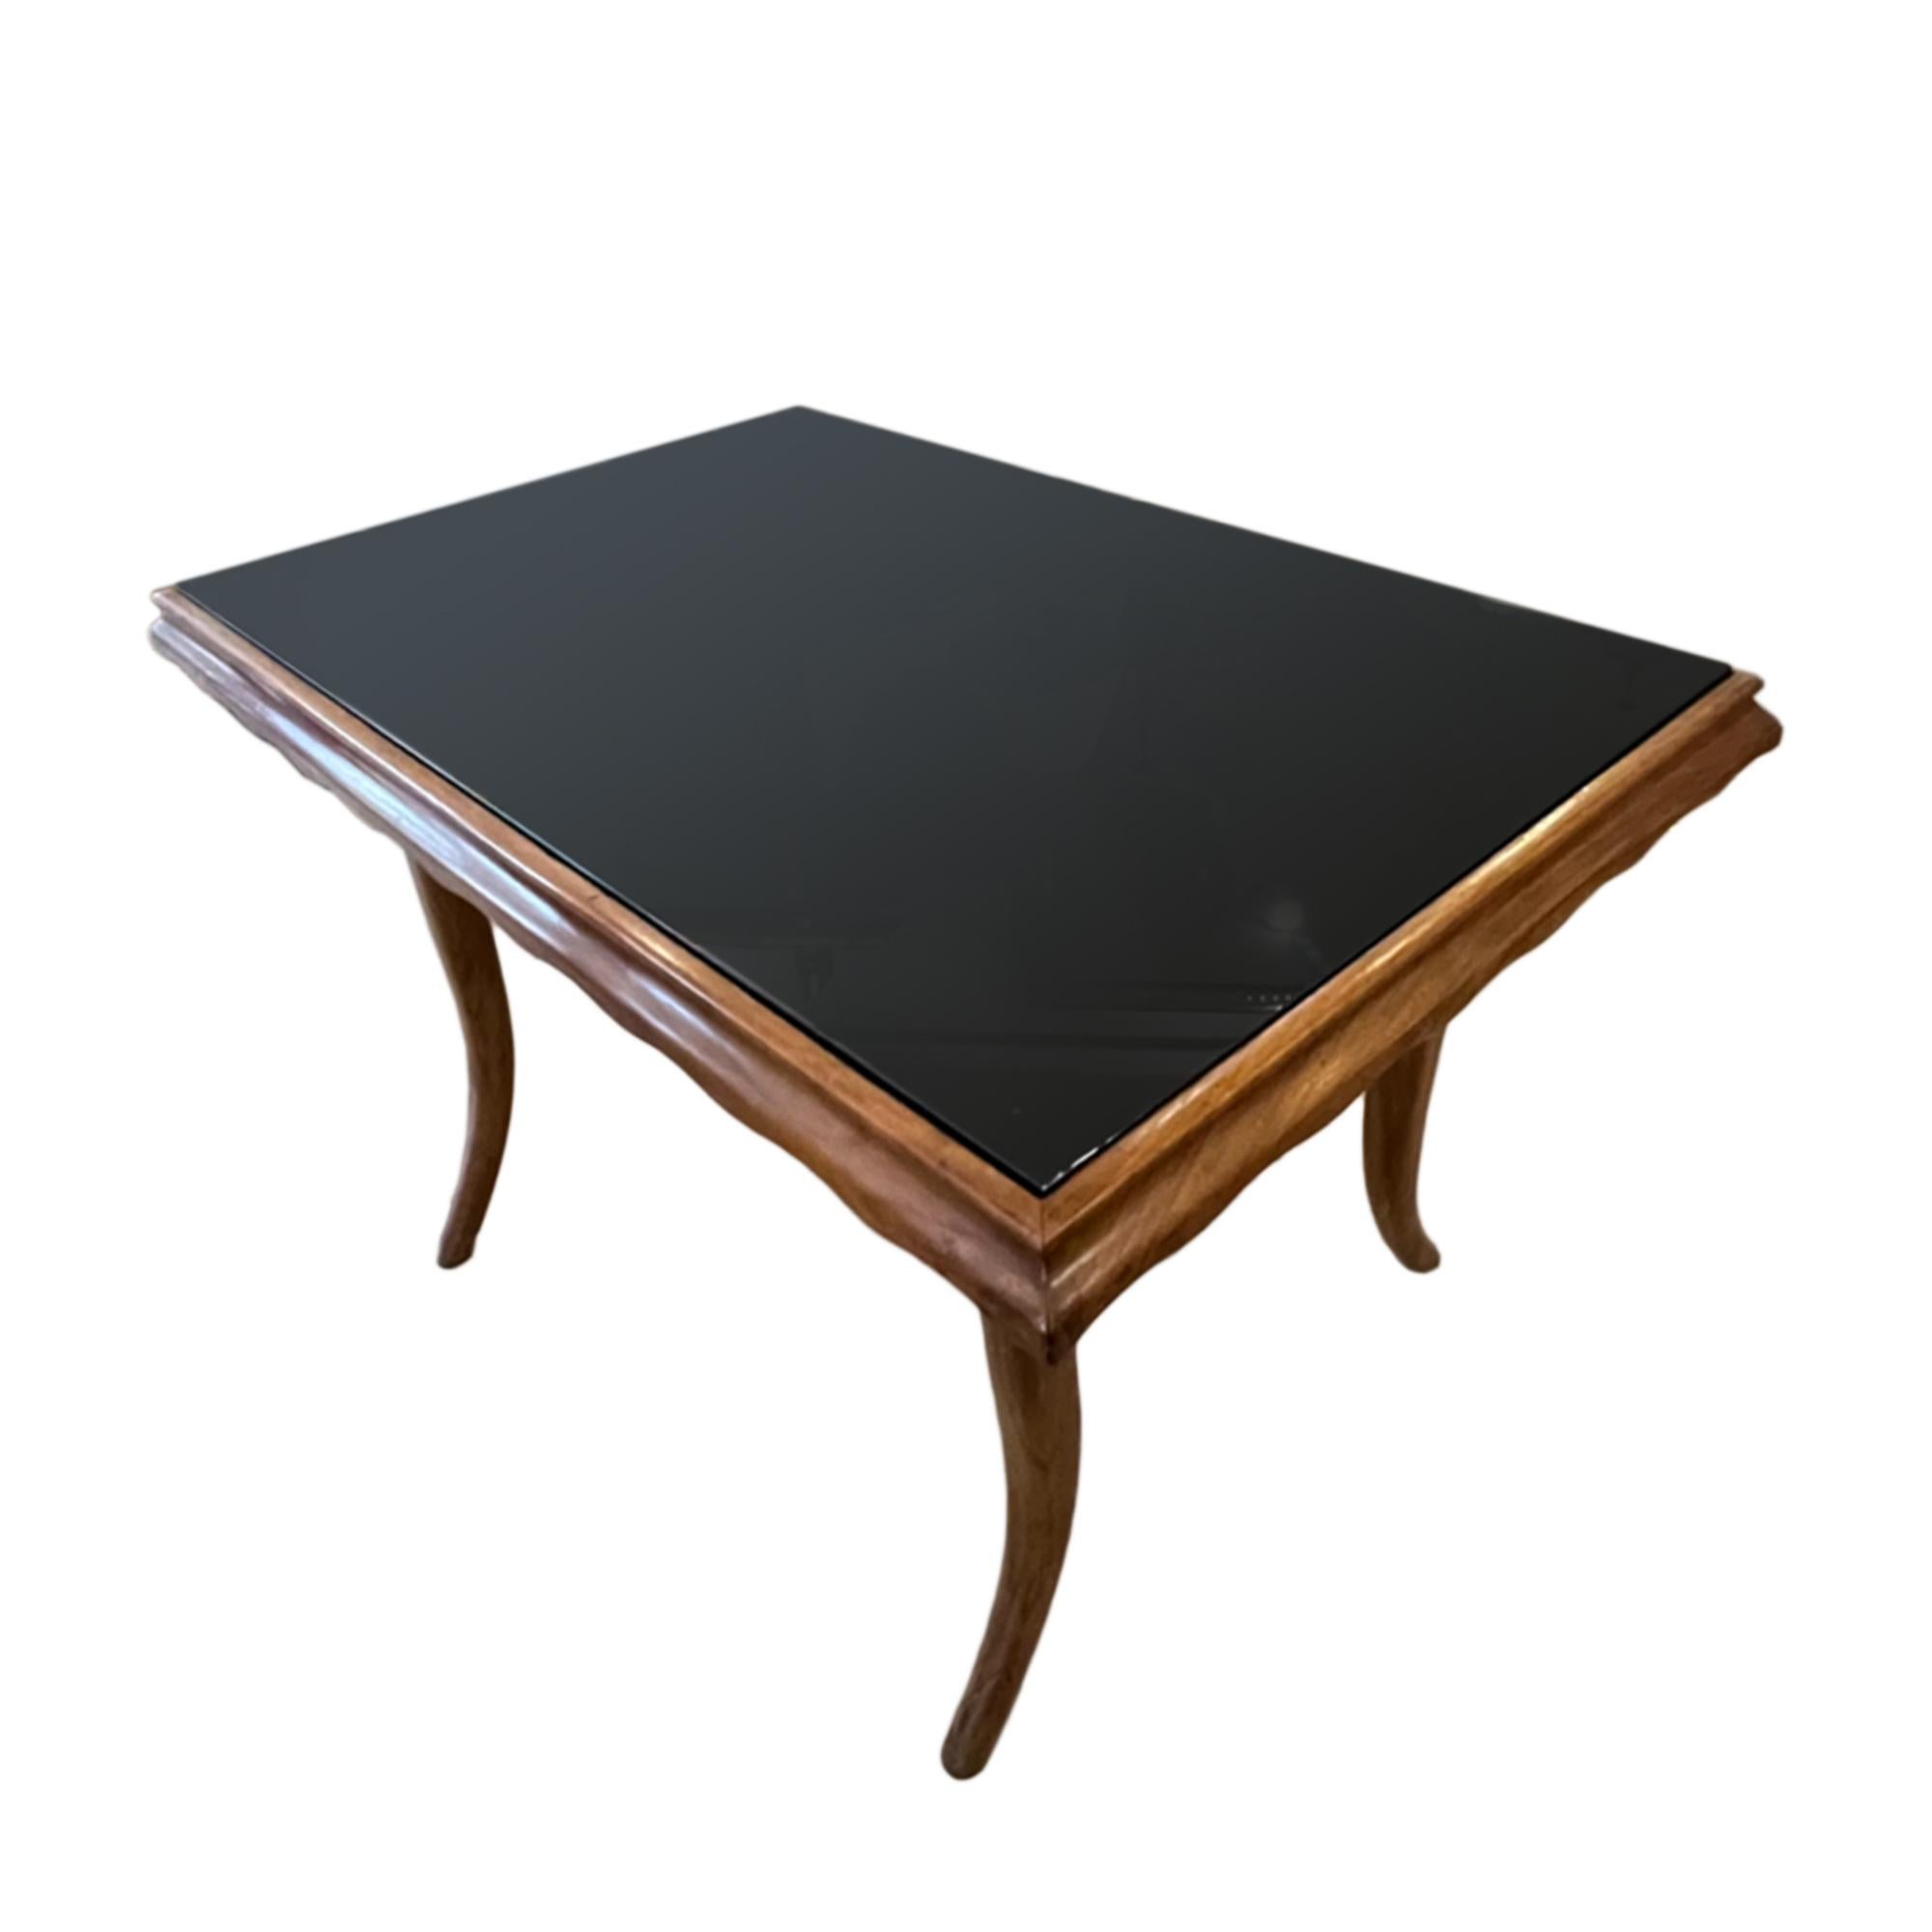 A good sized mid-century occasional table made from fruit wood with a black glass top. 

Perfect as a smaller coffee table, or a single side table. 

Simple elegant design.

Made in Italy.